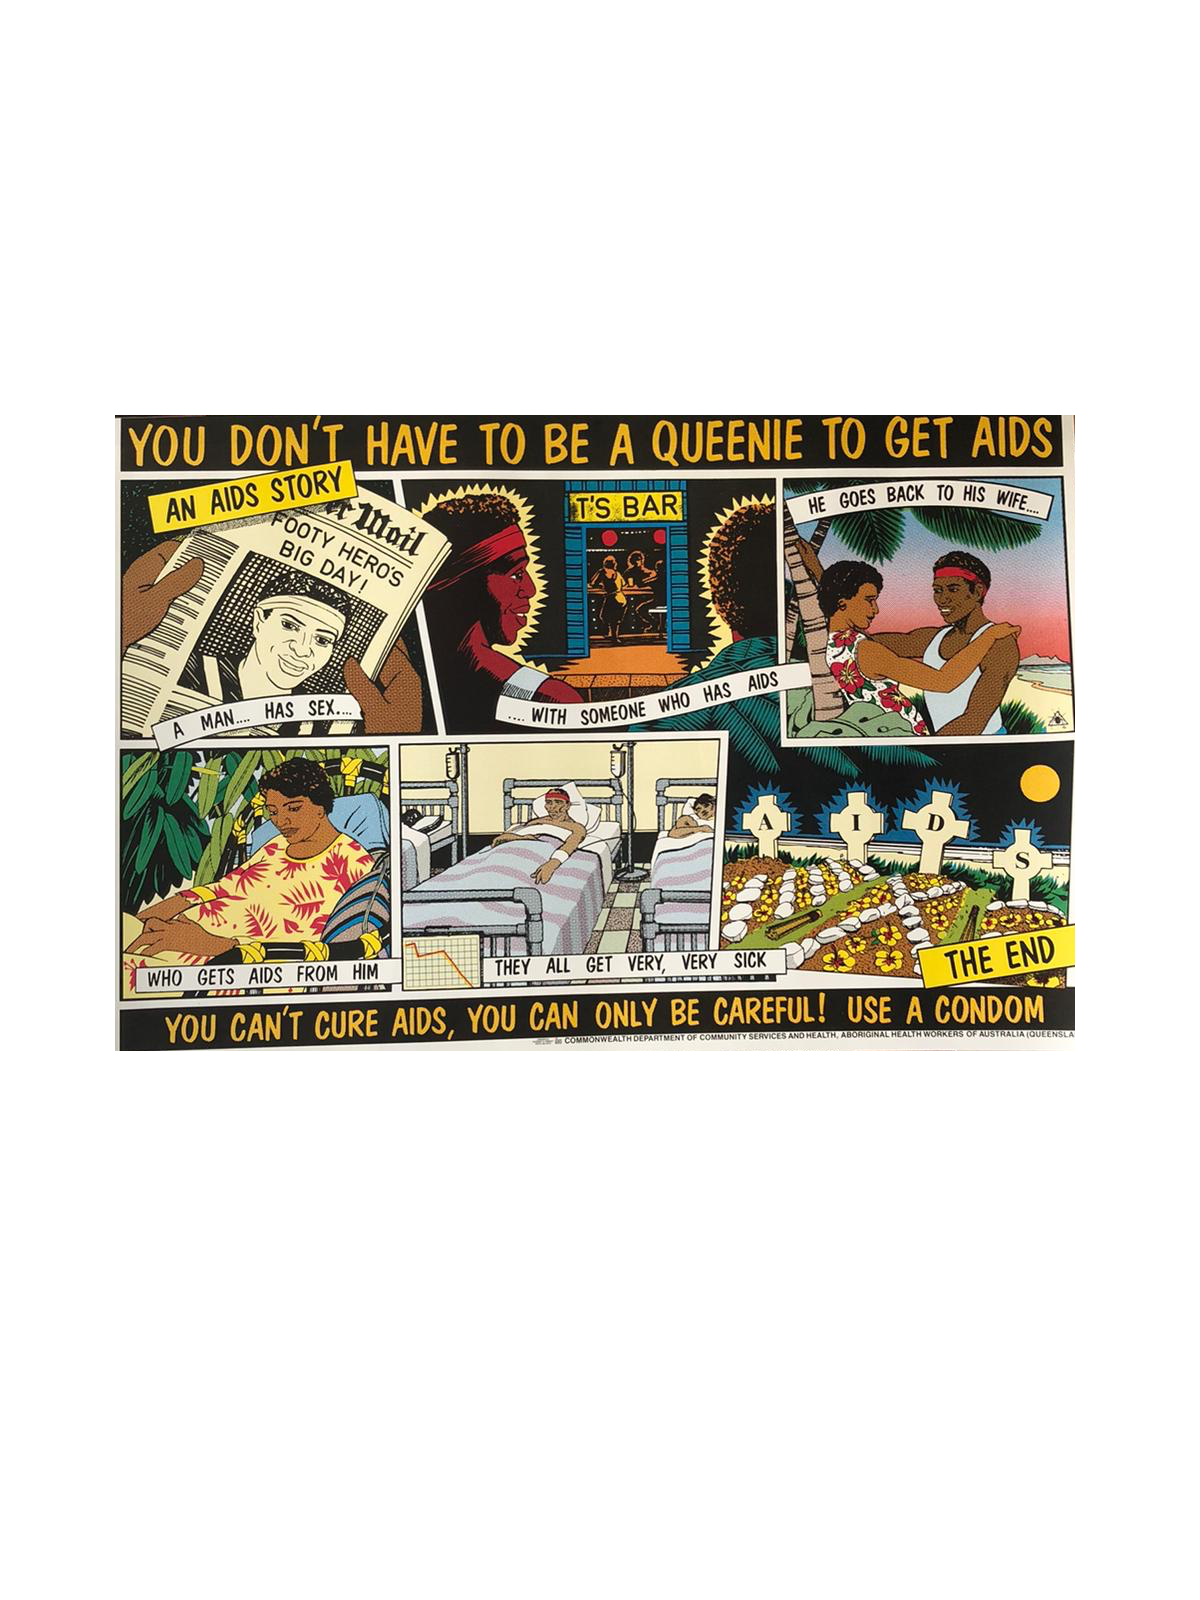 You don't have to be a queenie to get AIDS' Campaign Poster by Stephe –  Vintage Posters